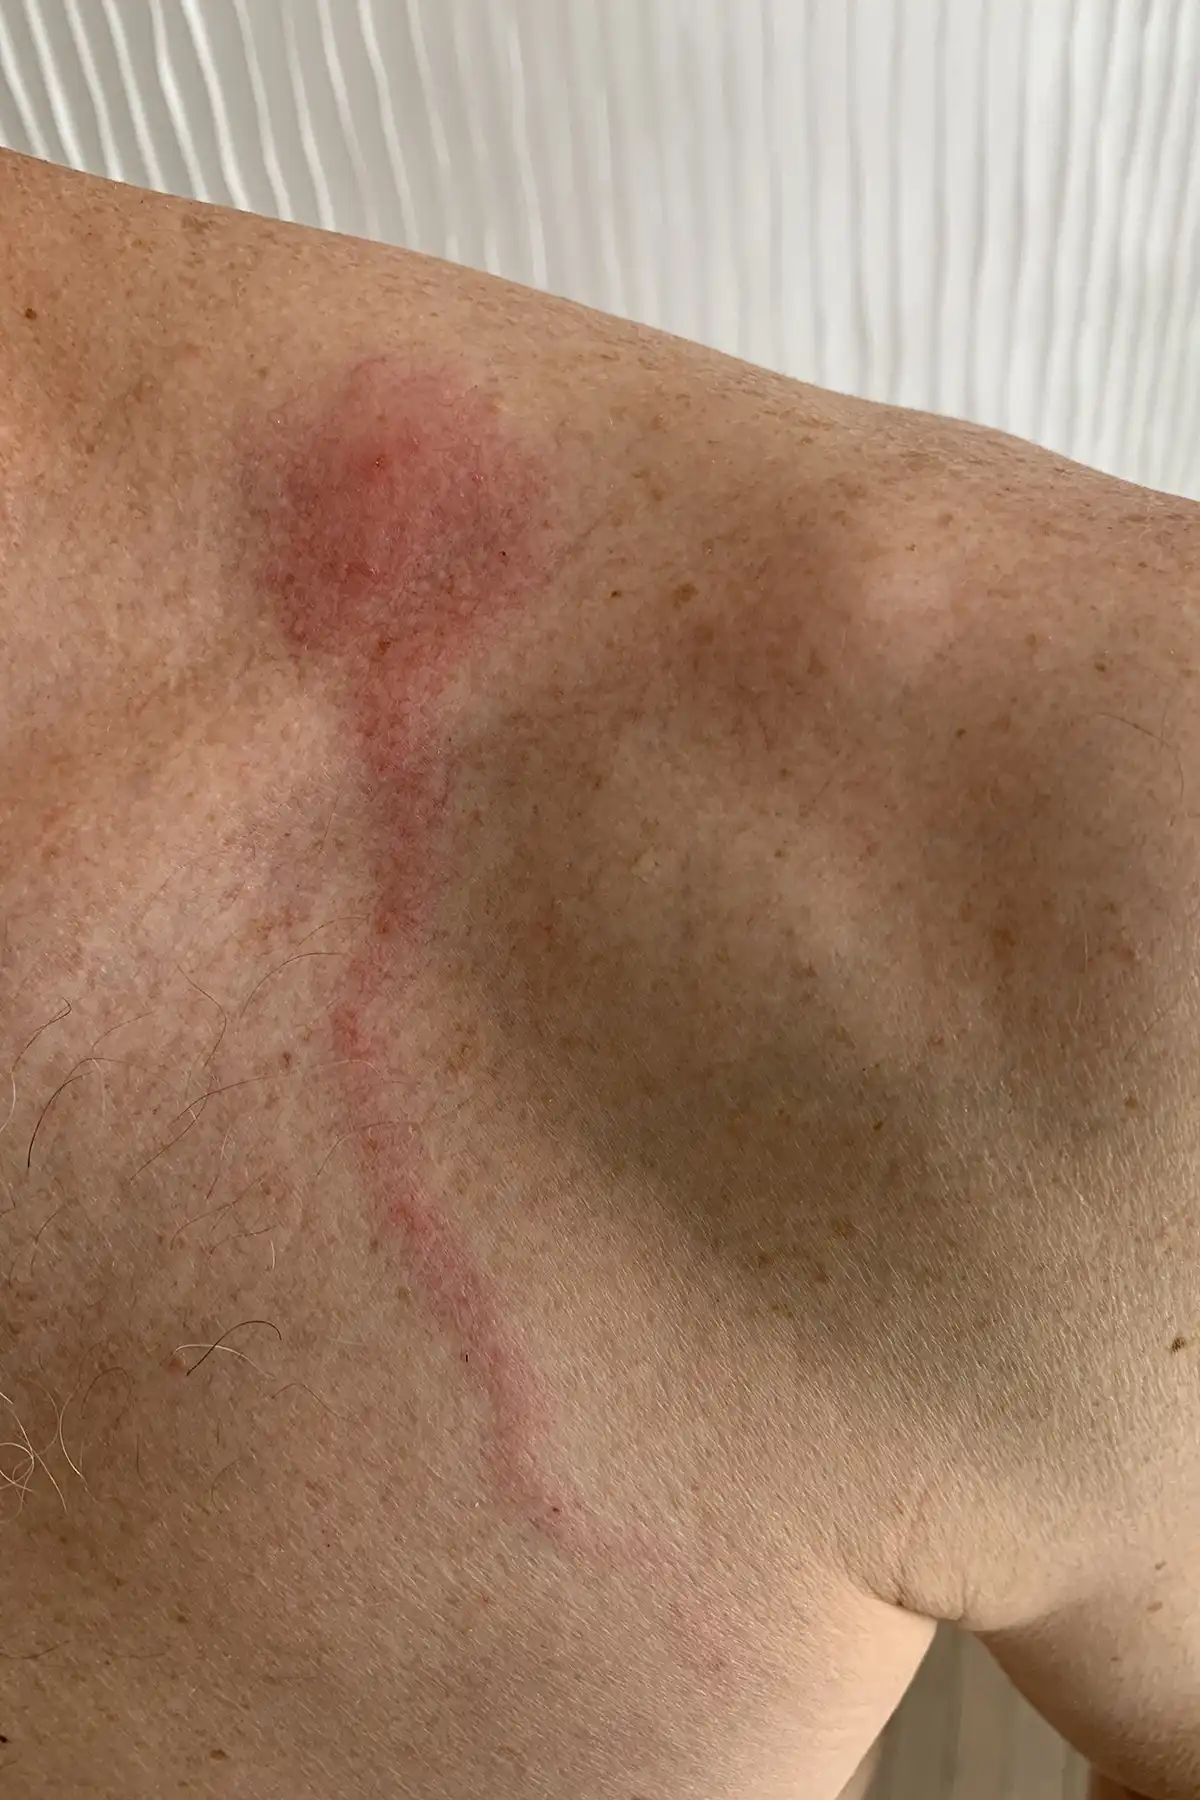 Spider Bite Pictures - What They Look Like, How To Treat Symptoms